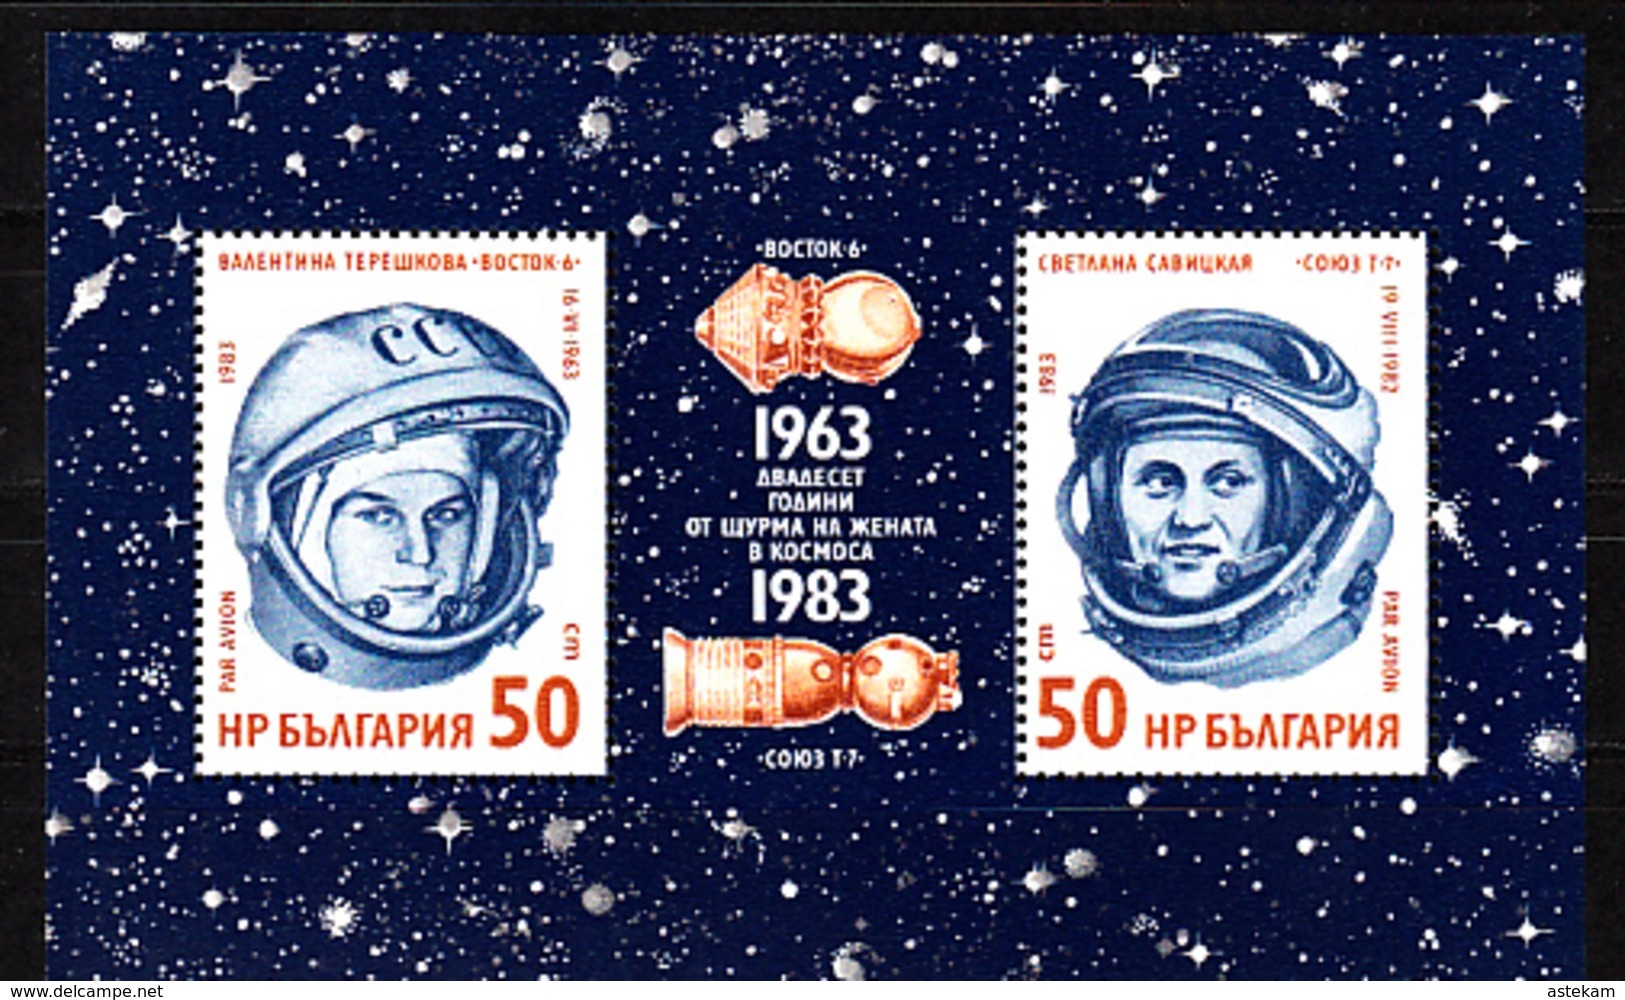 BULGARIA 1983, SPACE, 25 Years WOMAN In SPACE, MNH BLOCK, GOOD QUALITY, *** - Neufs